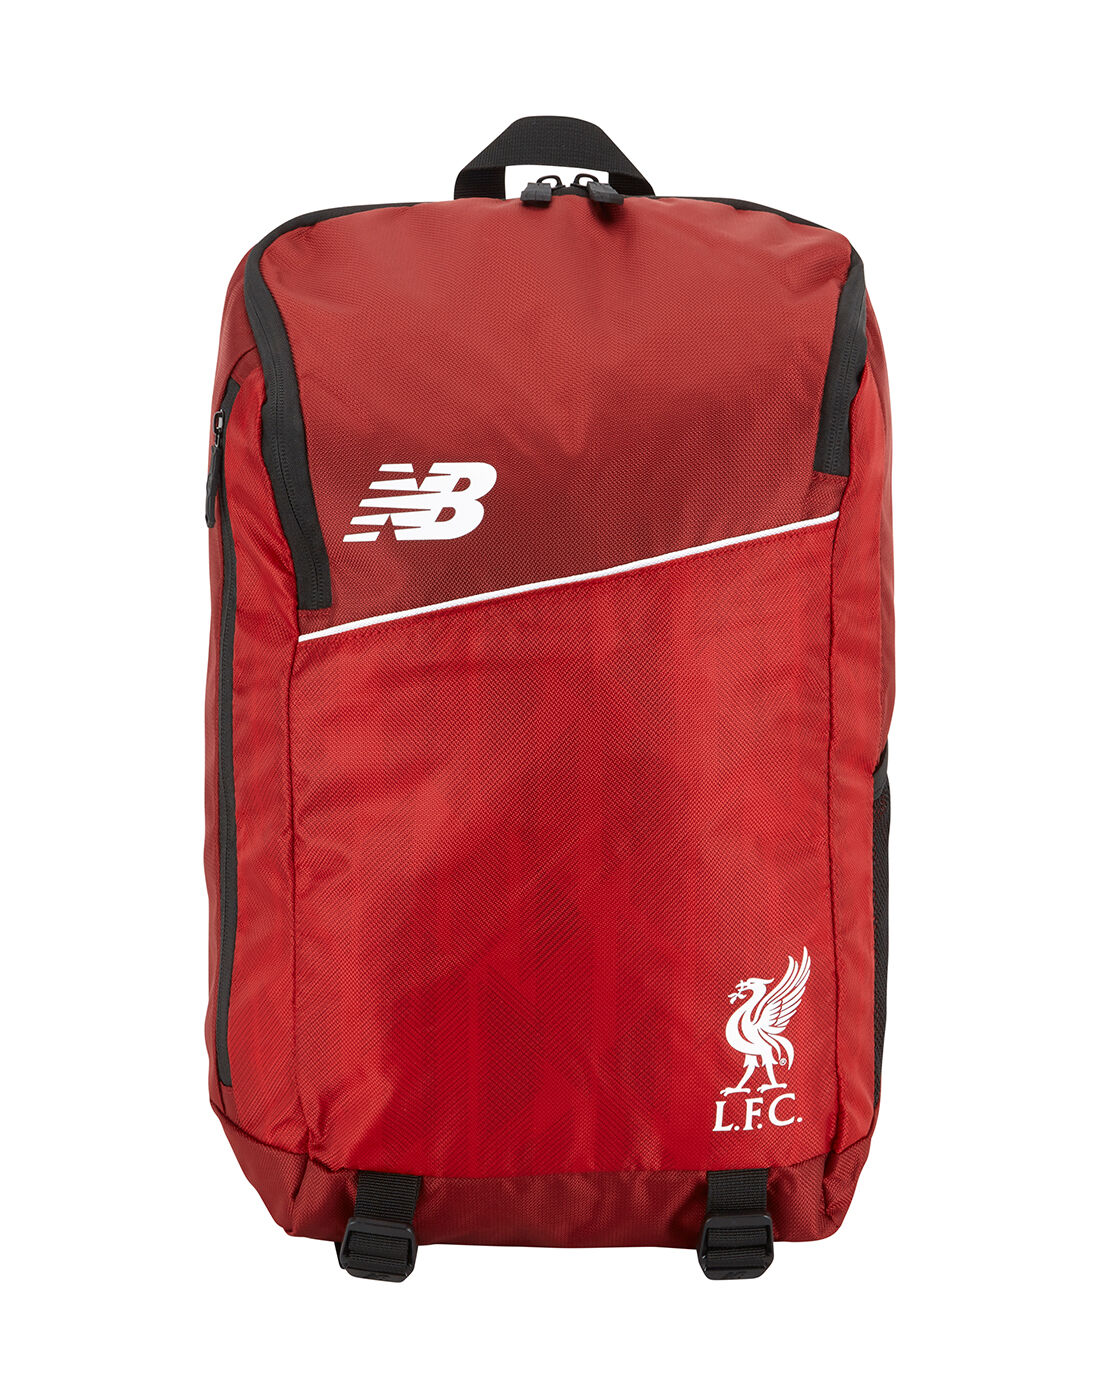 New Balance Liverpool Backpack - Red 